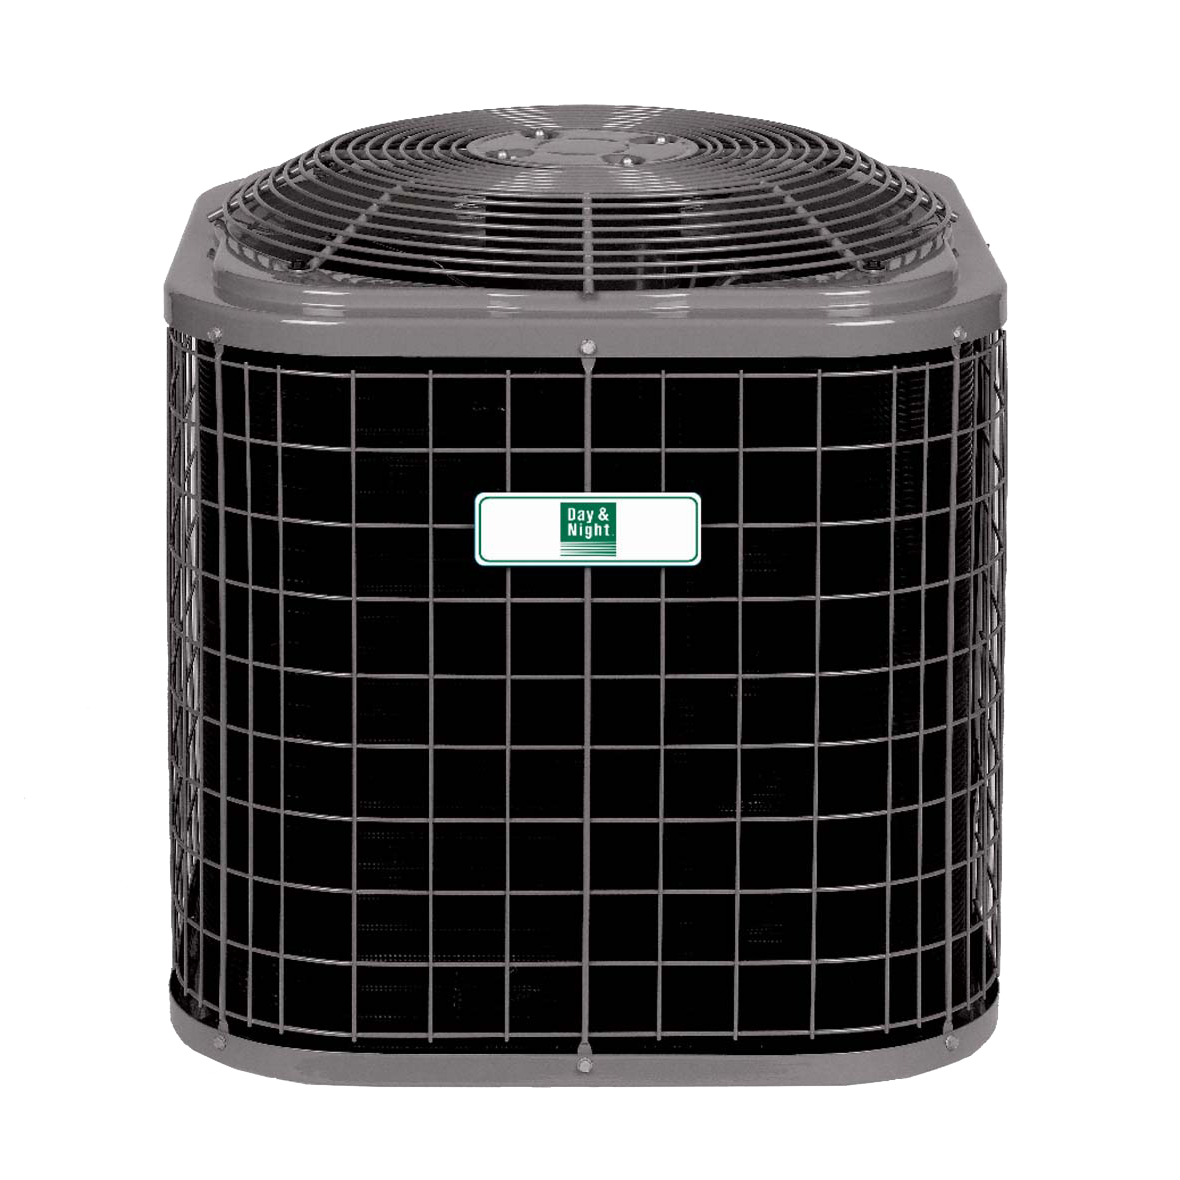 N4A3 Central Air Conditioner AC Unit Day & Night®